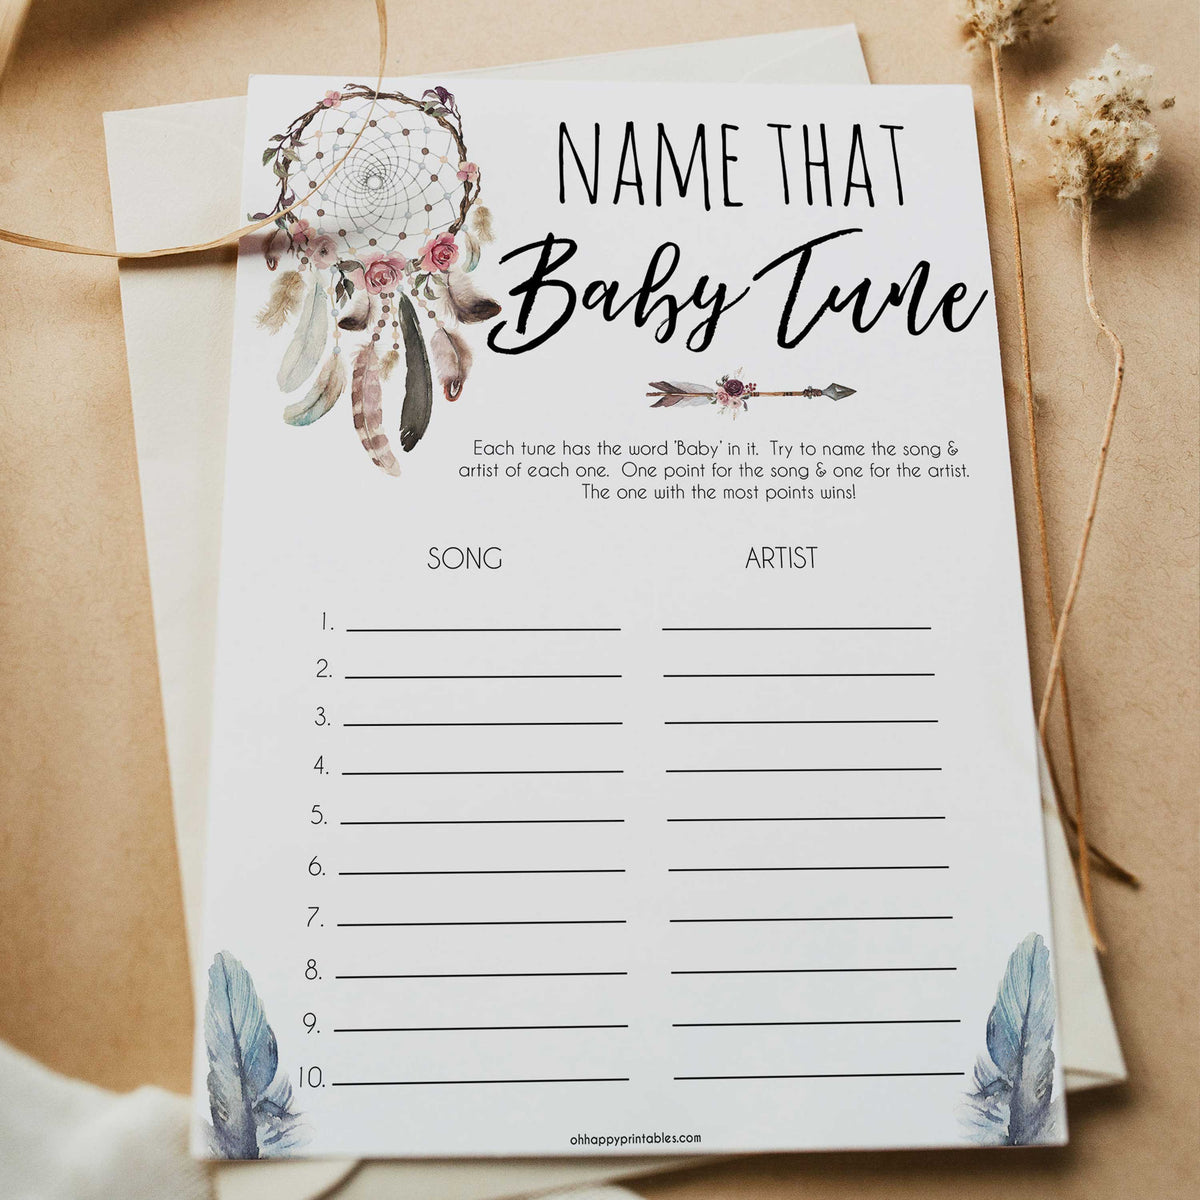 Boho baby games, name that baby tune baby game, fun baby games, printable baby games, top 10 baby games, boho baby shower, baby games, hilarious baby games